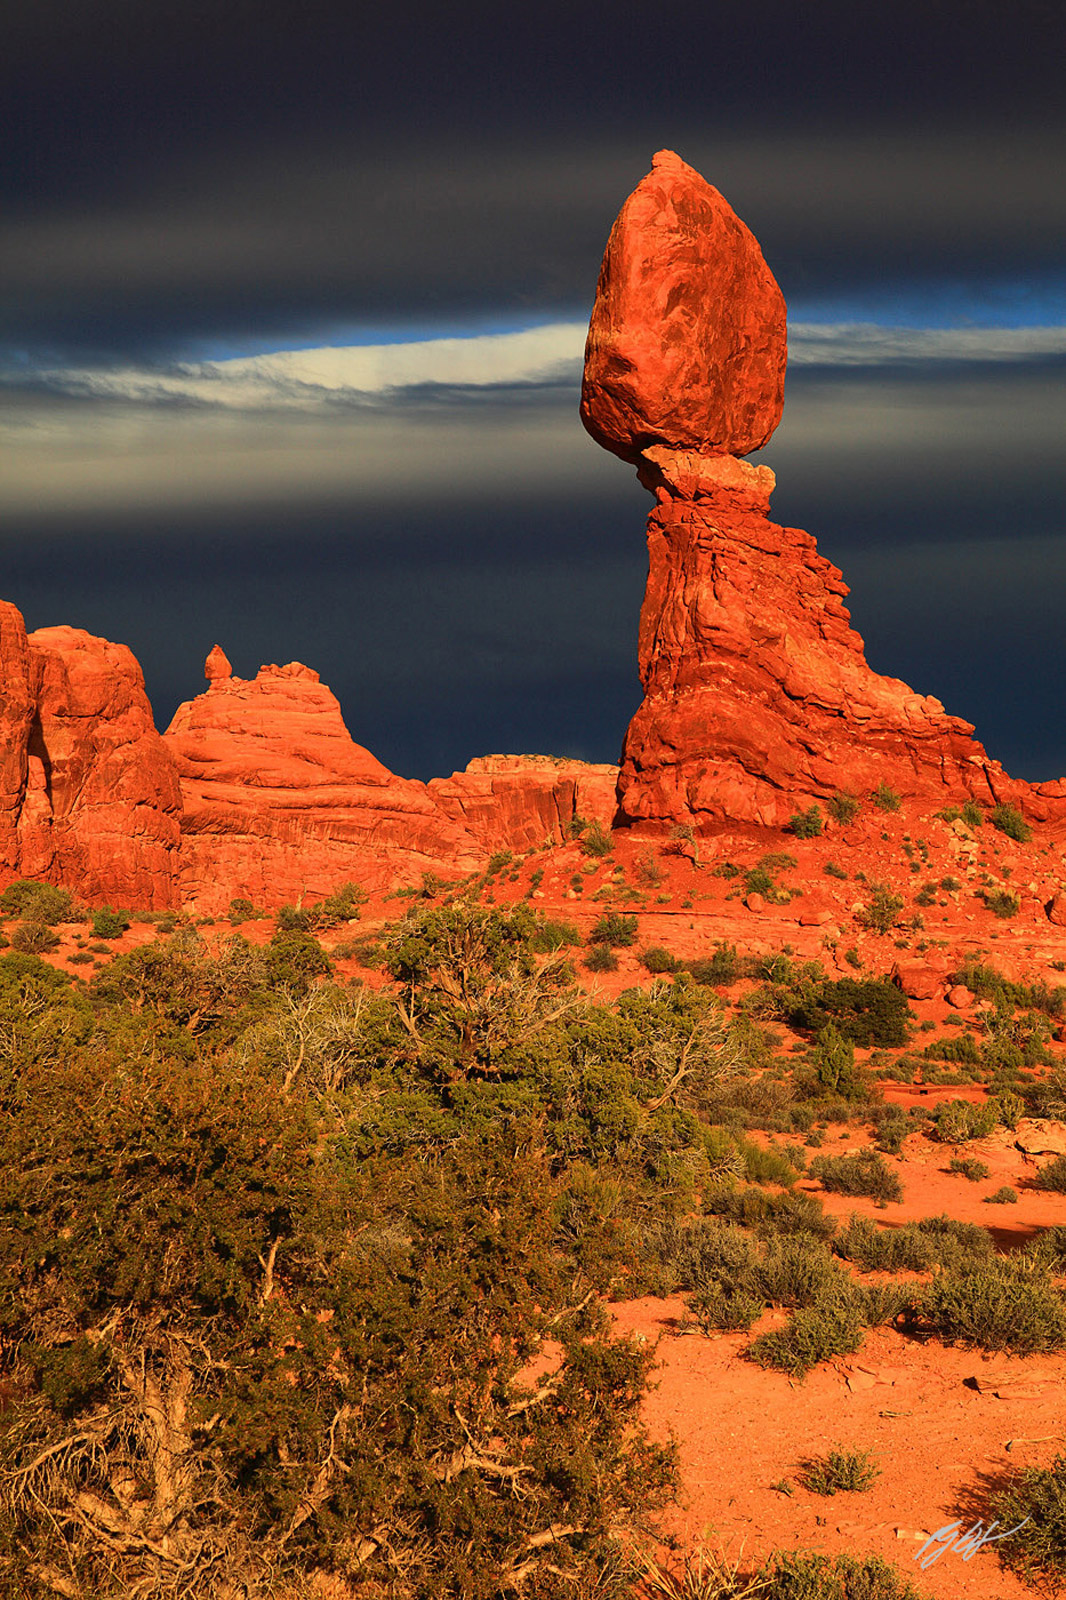 Evening Light on the Amazing Balancing Rock in Arches National Park in Utah